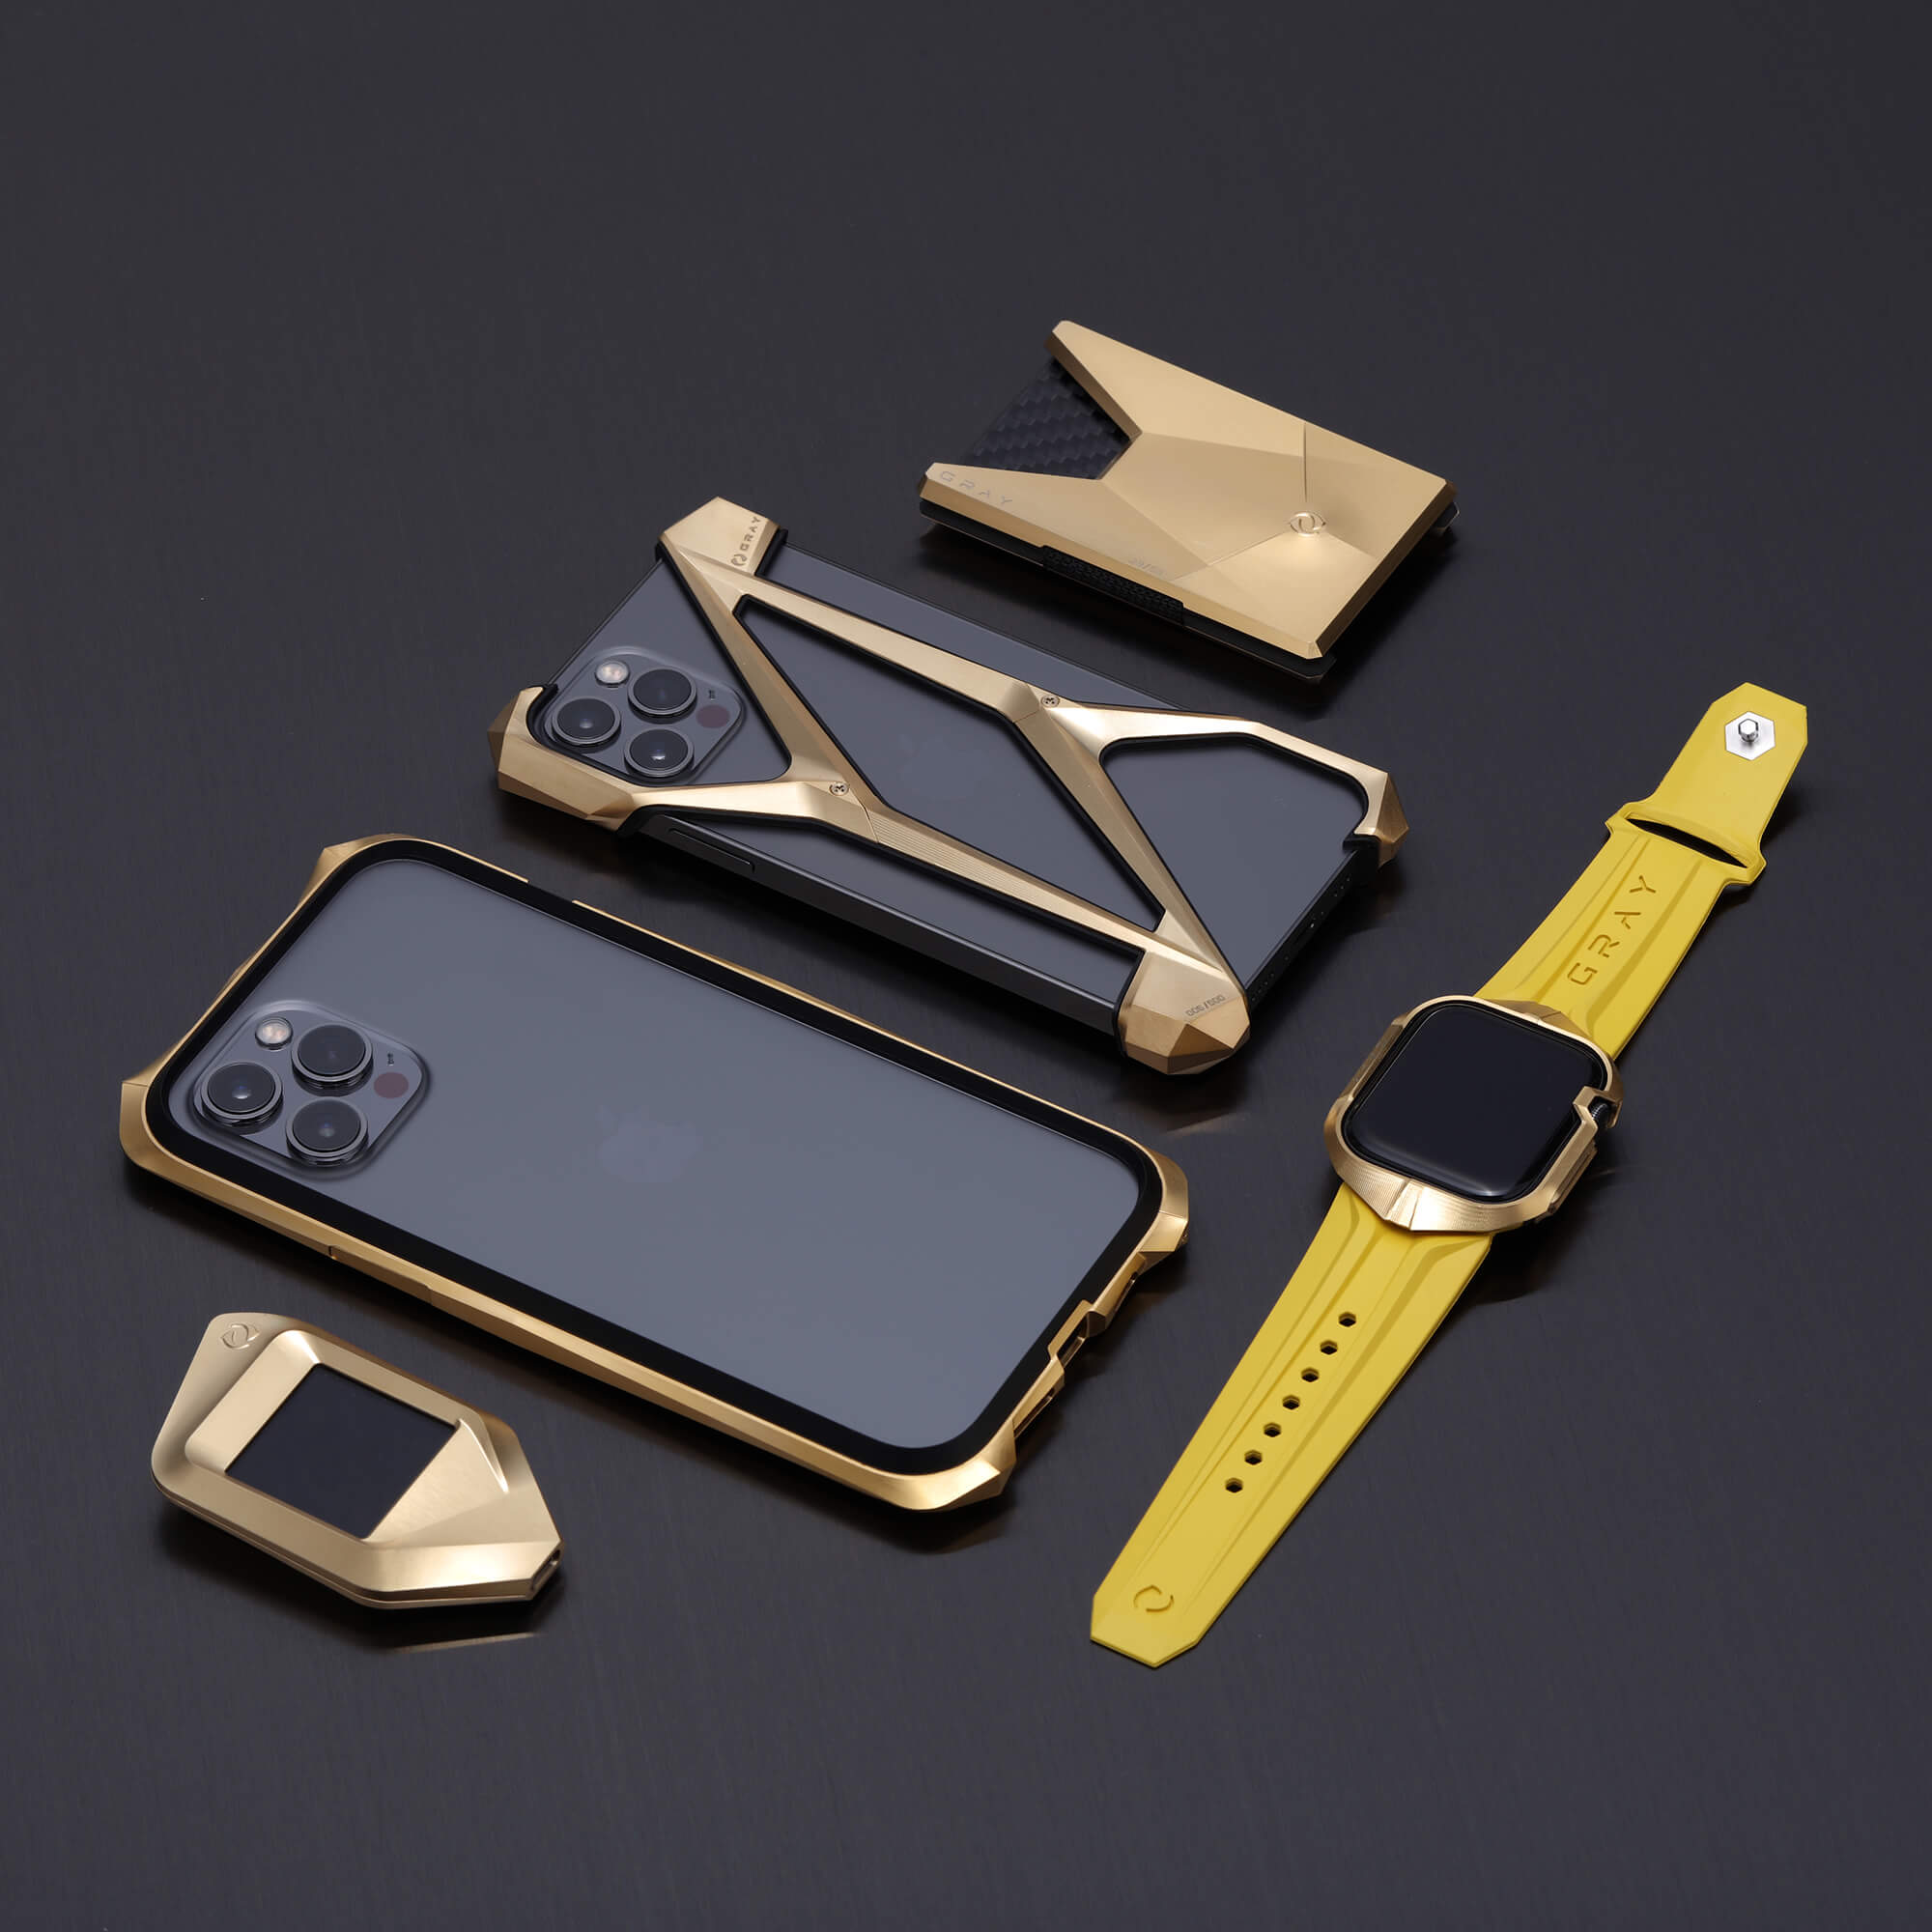 Gold gray collection including luxury iphone case